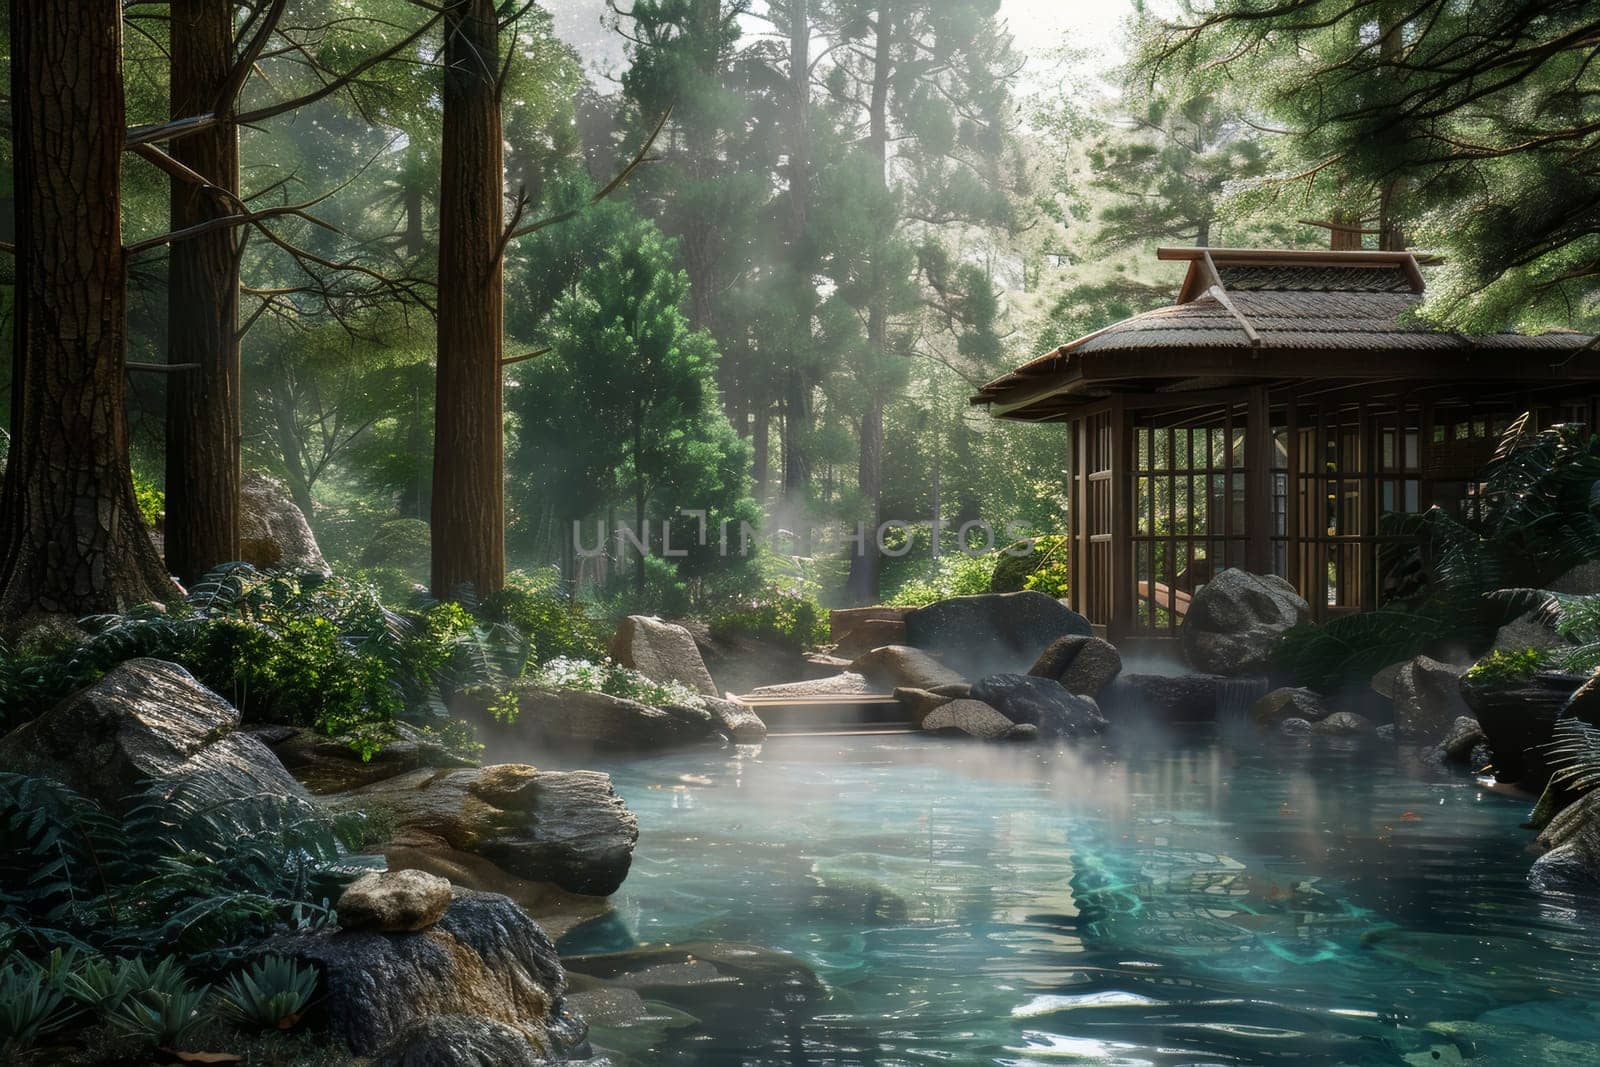 A tranquil spa retreat enveloped in a lush forest setting, with mist rising from a hot pool surrounded by natural stones. Sunlight filters through the trees, enhancing the serene atmosphere